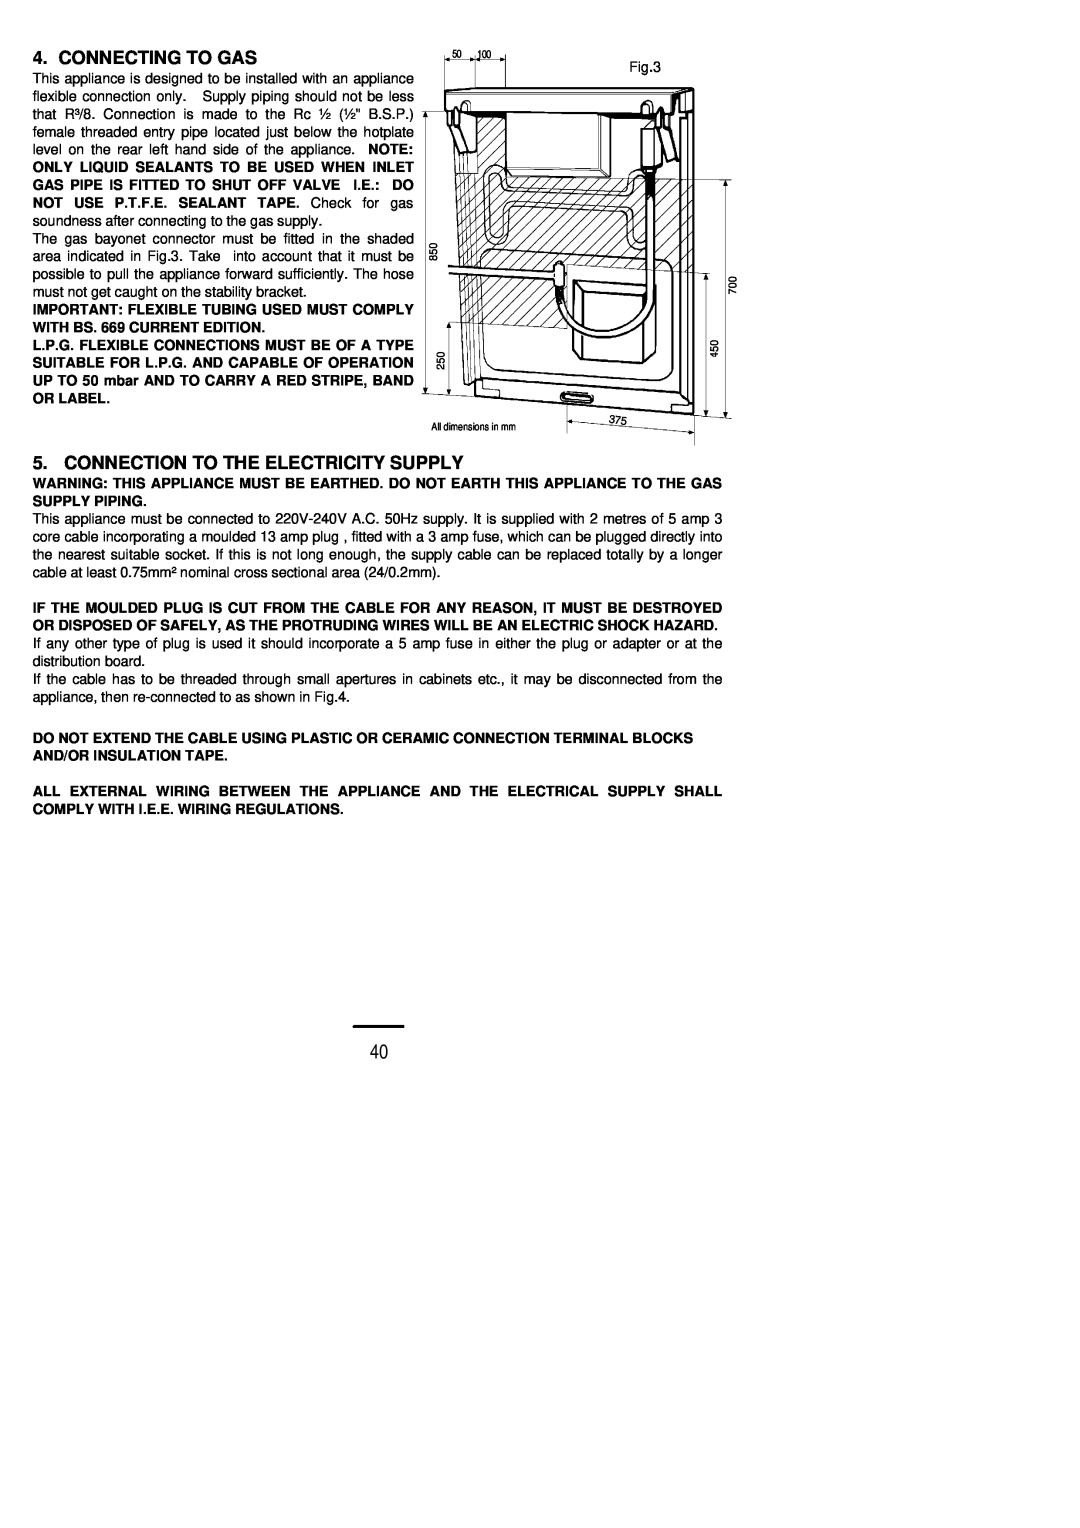 Electrolux SIG 450 installation instructions Connecting To Gas, Connection To The Electricity Supply 